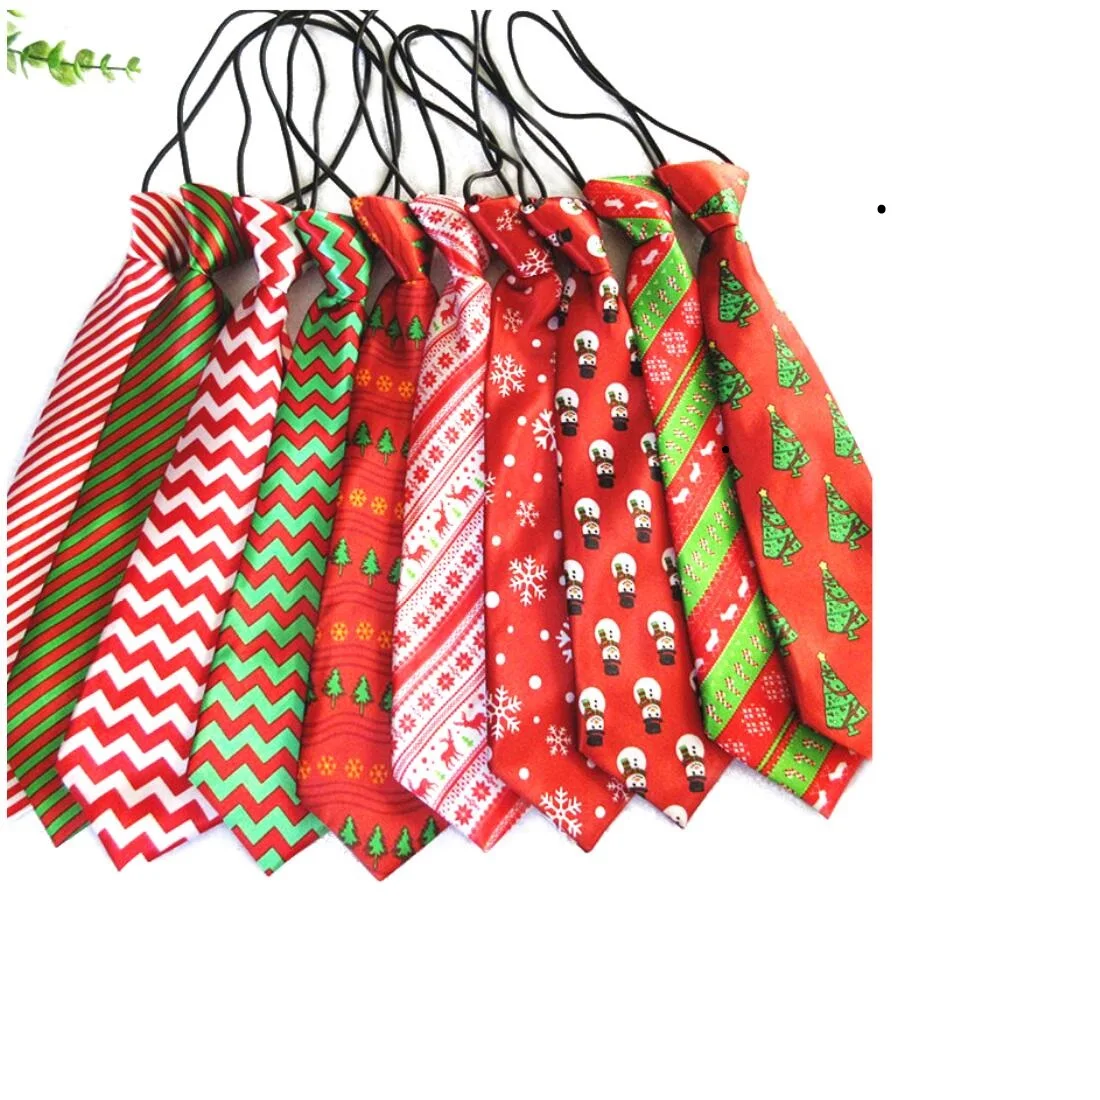 

50pc/lot Christmas holiday Large Dog Neckties For Big Pet Dogs Ties Supplies Neckties Dog Grooming Supplies Y0206